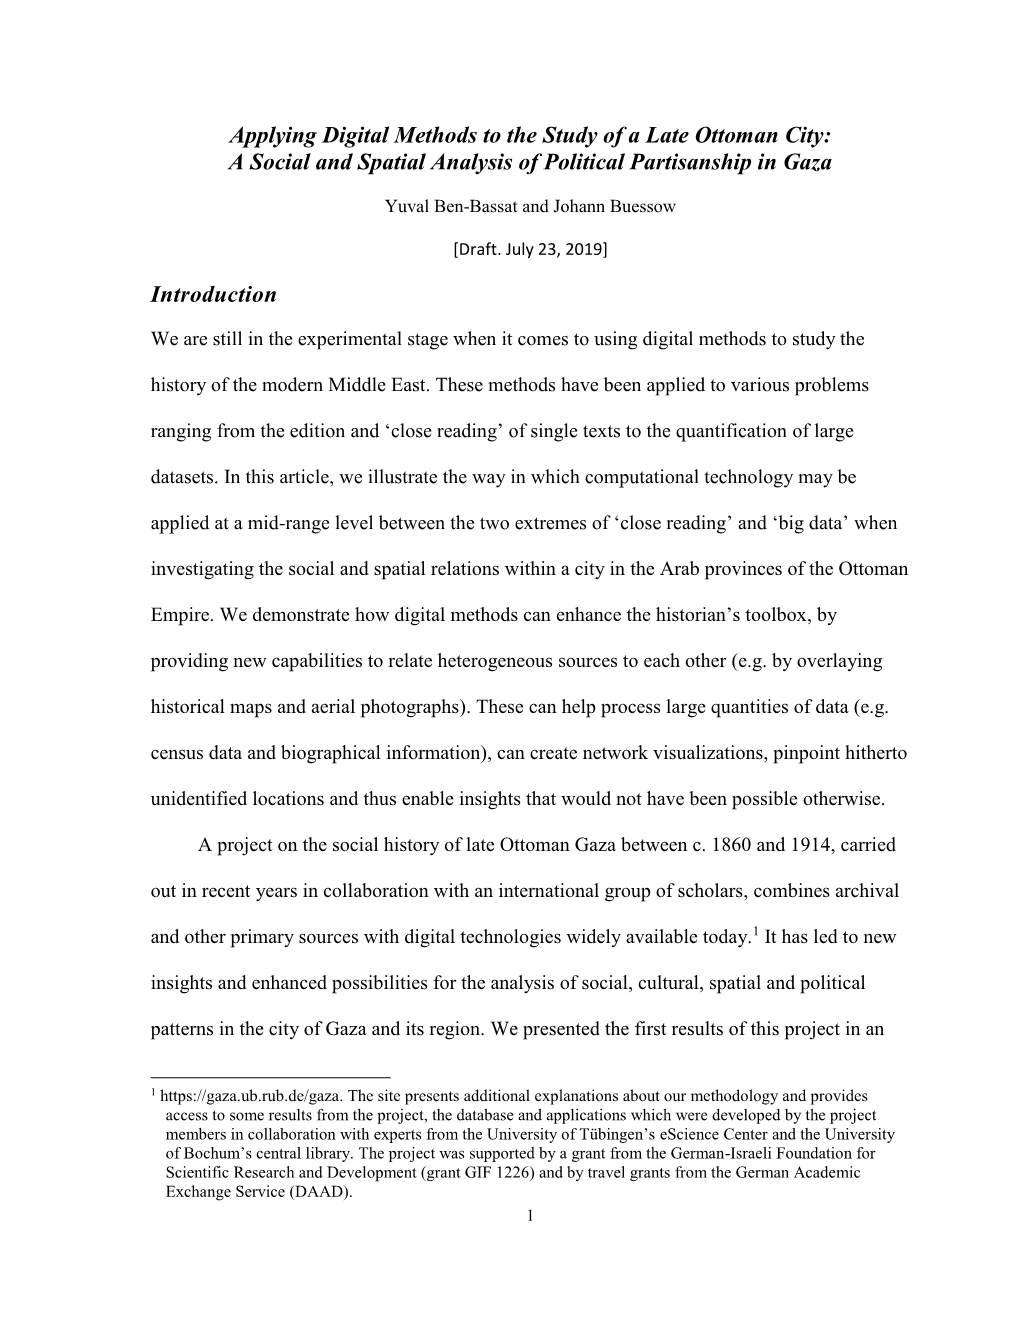 Applying Digital Methods to the Study of a Late Ottoman City: a Social and Spatial Analysis of Political Partisanship in Gaza In